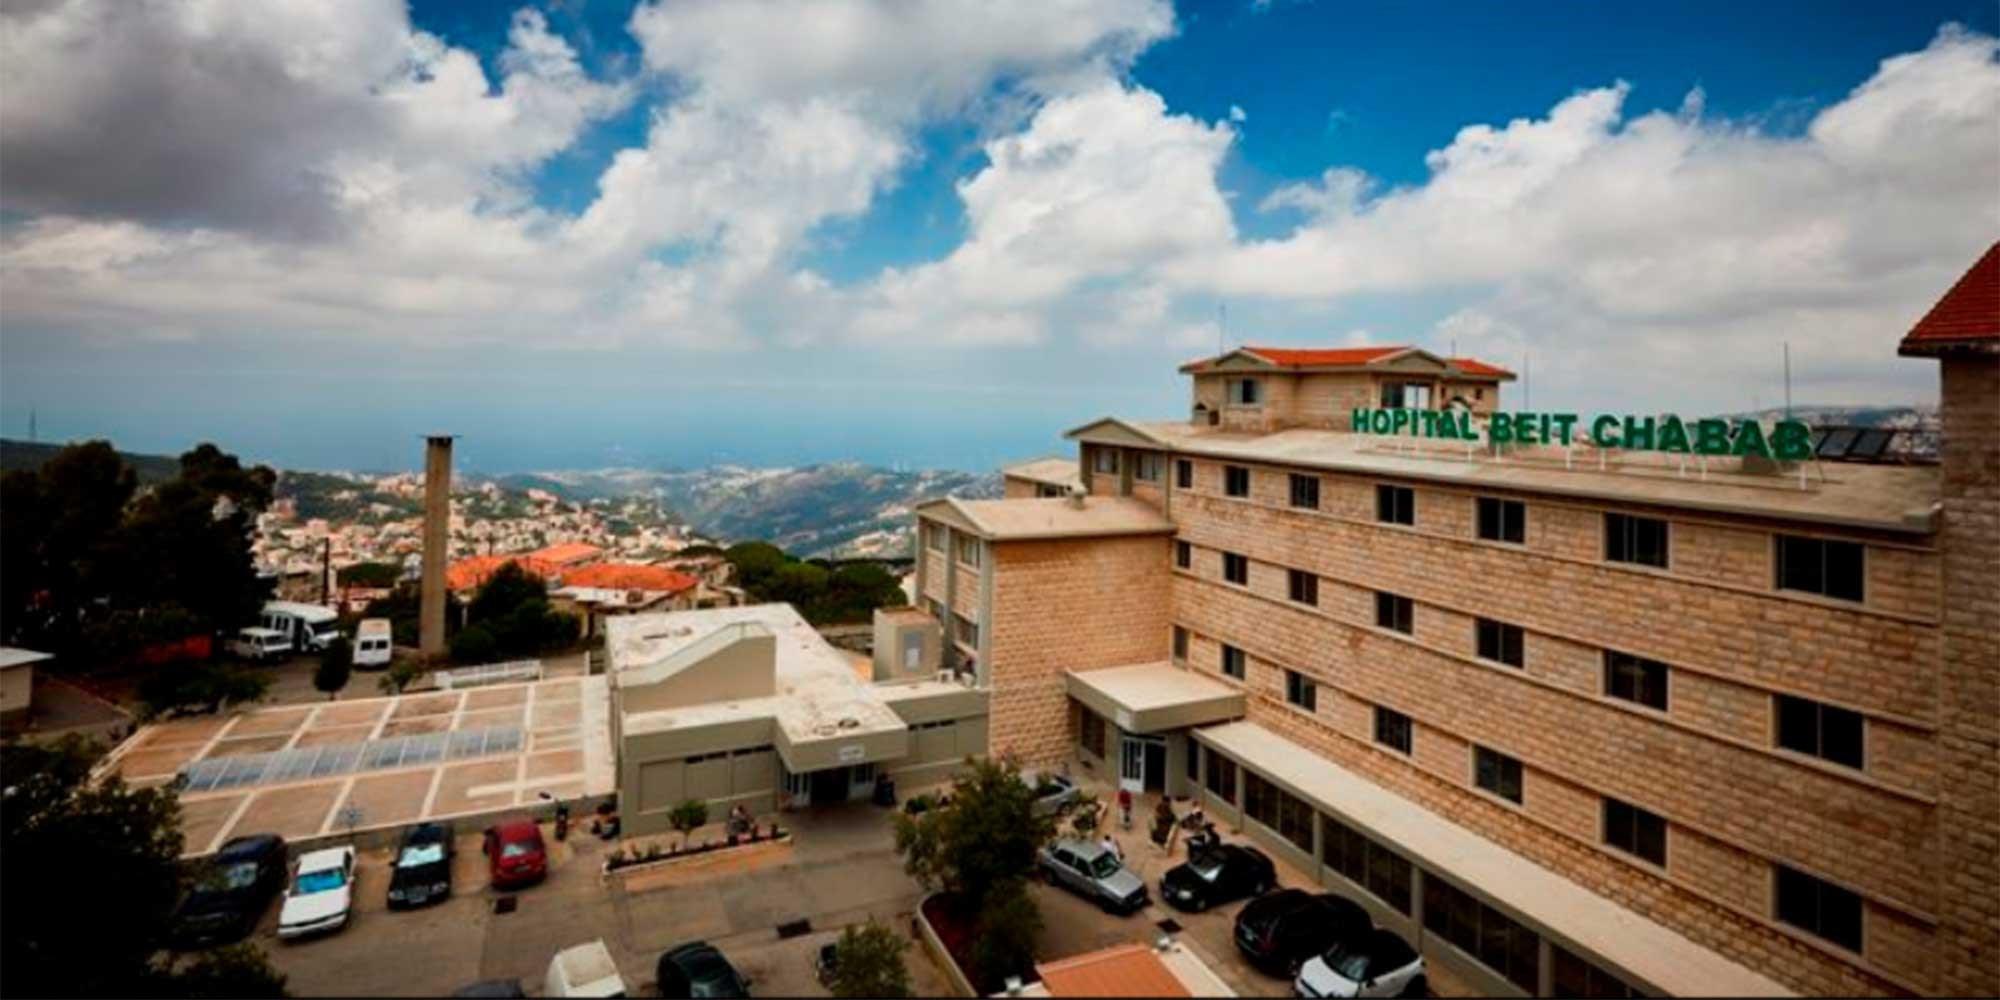 Centre Hospitalier - Beit Chabab